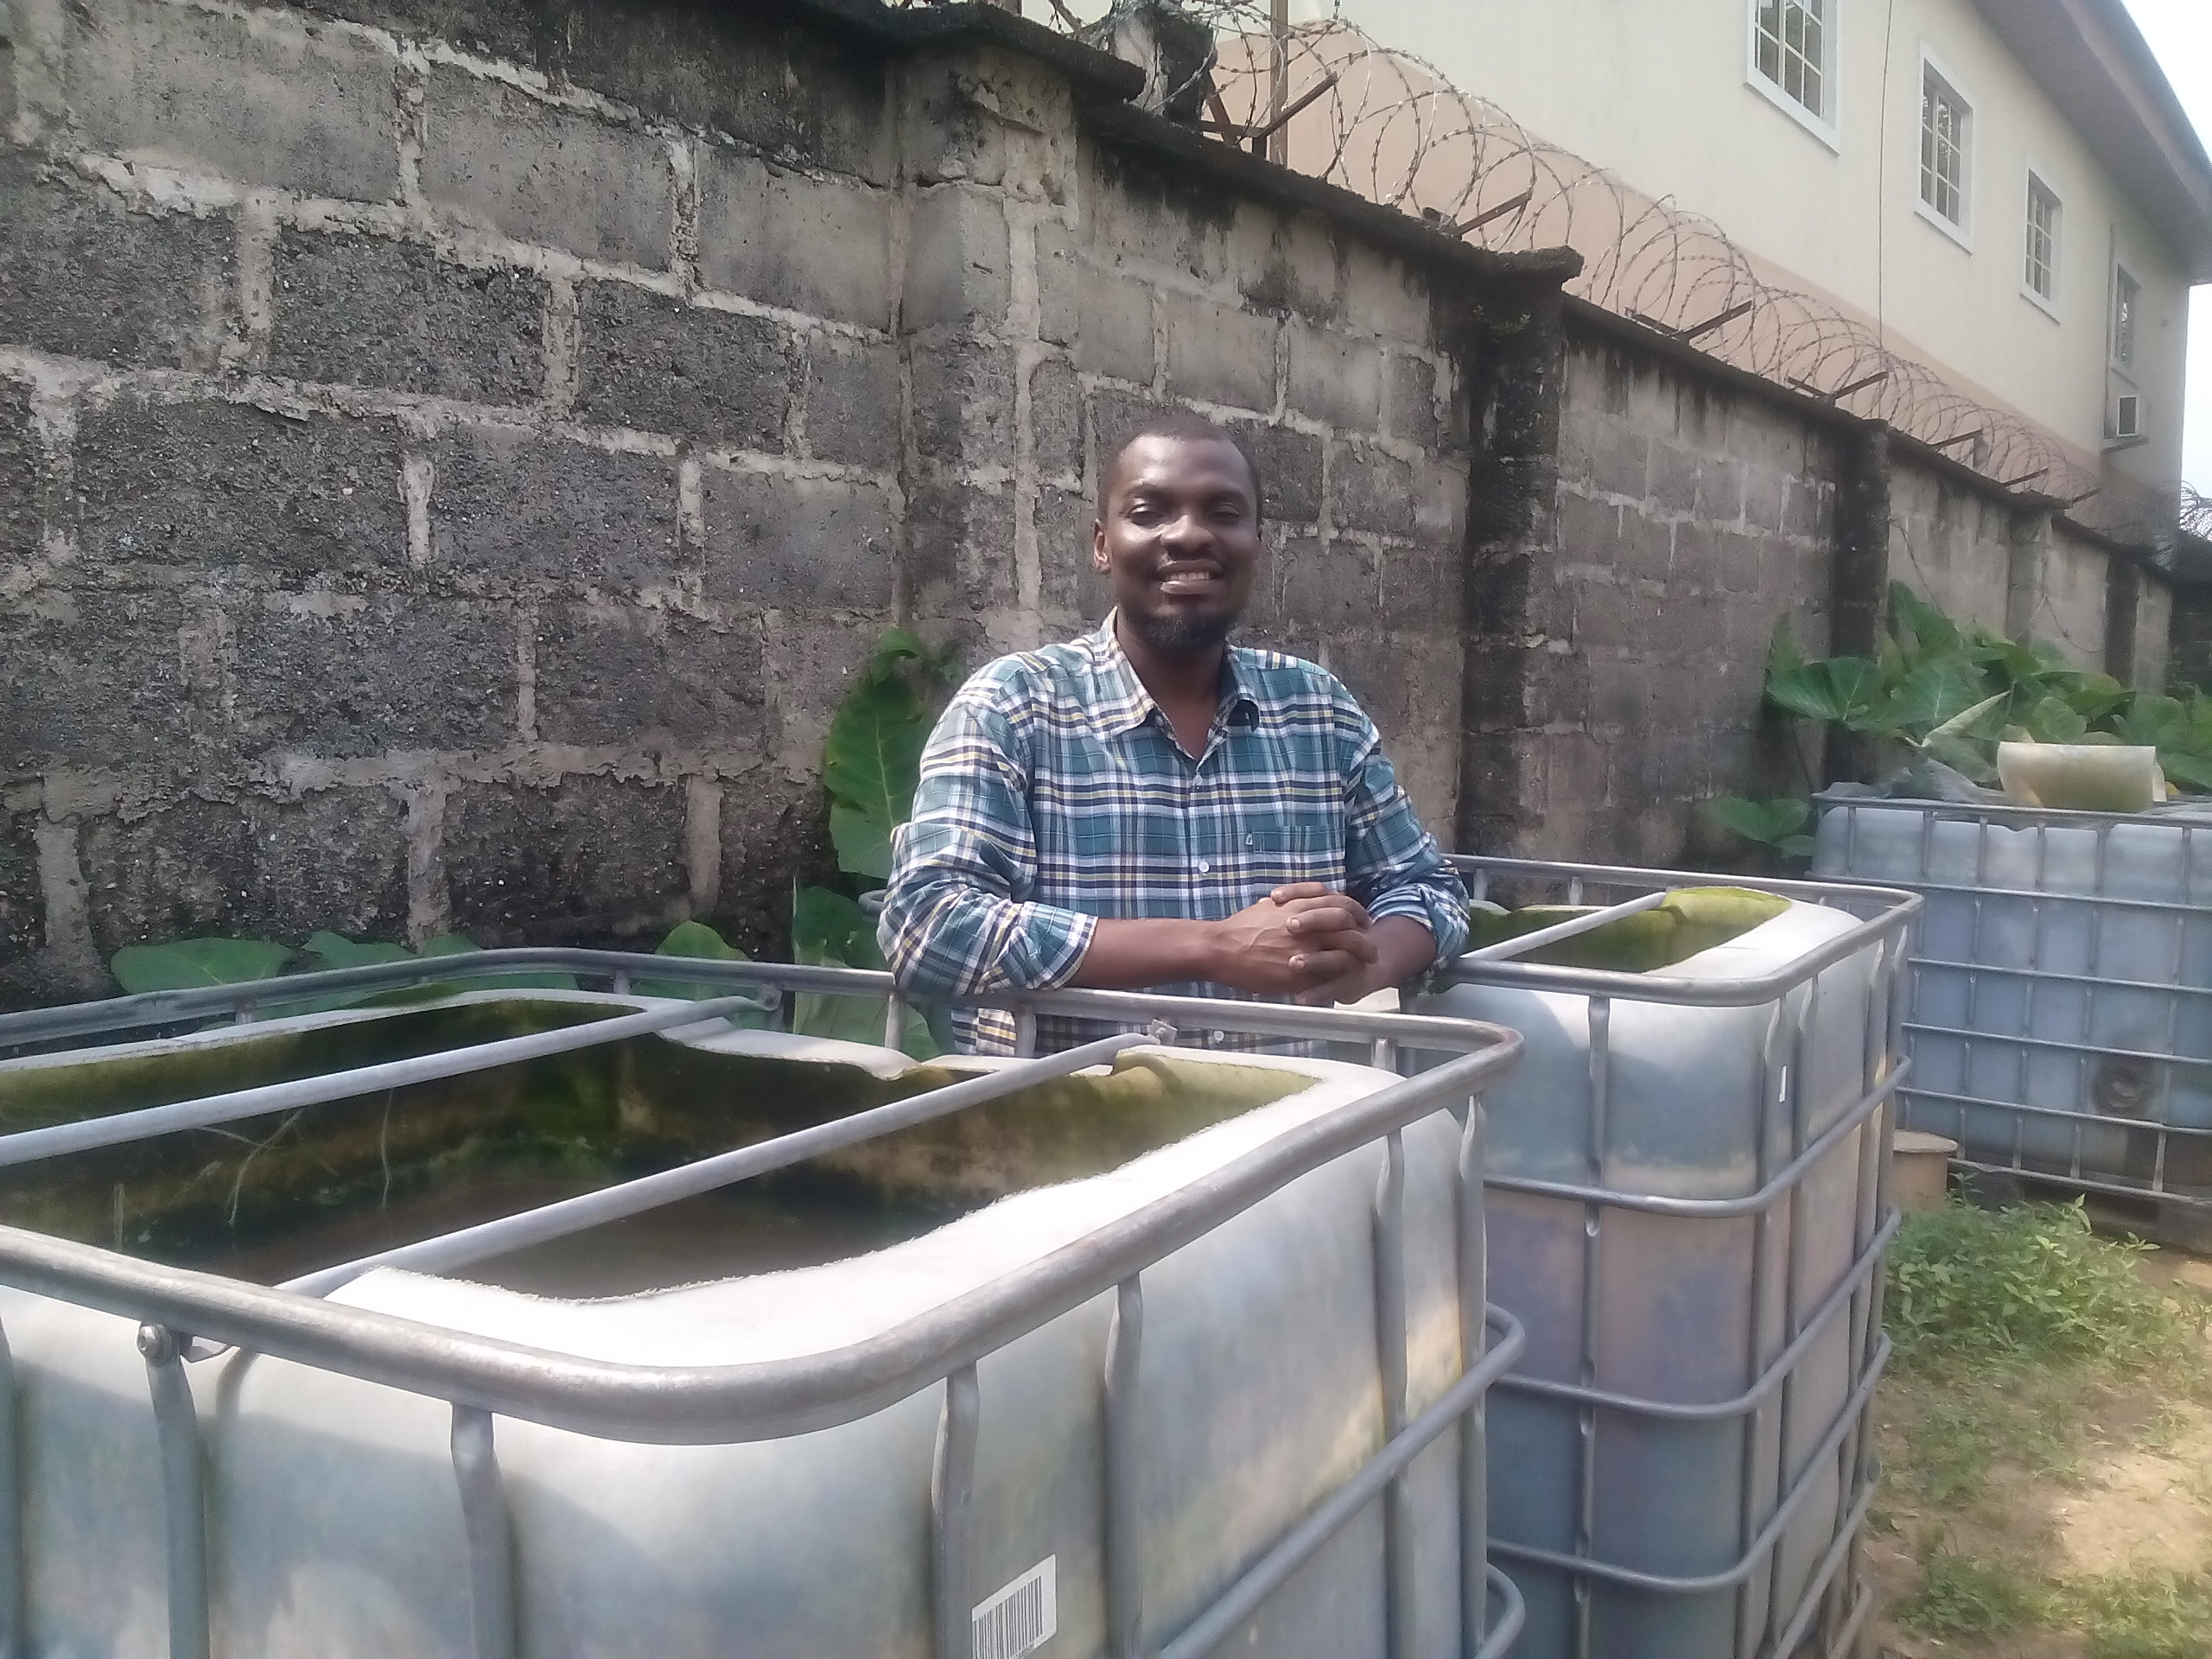 Chibuike on his fish farm in Port Harcourt.